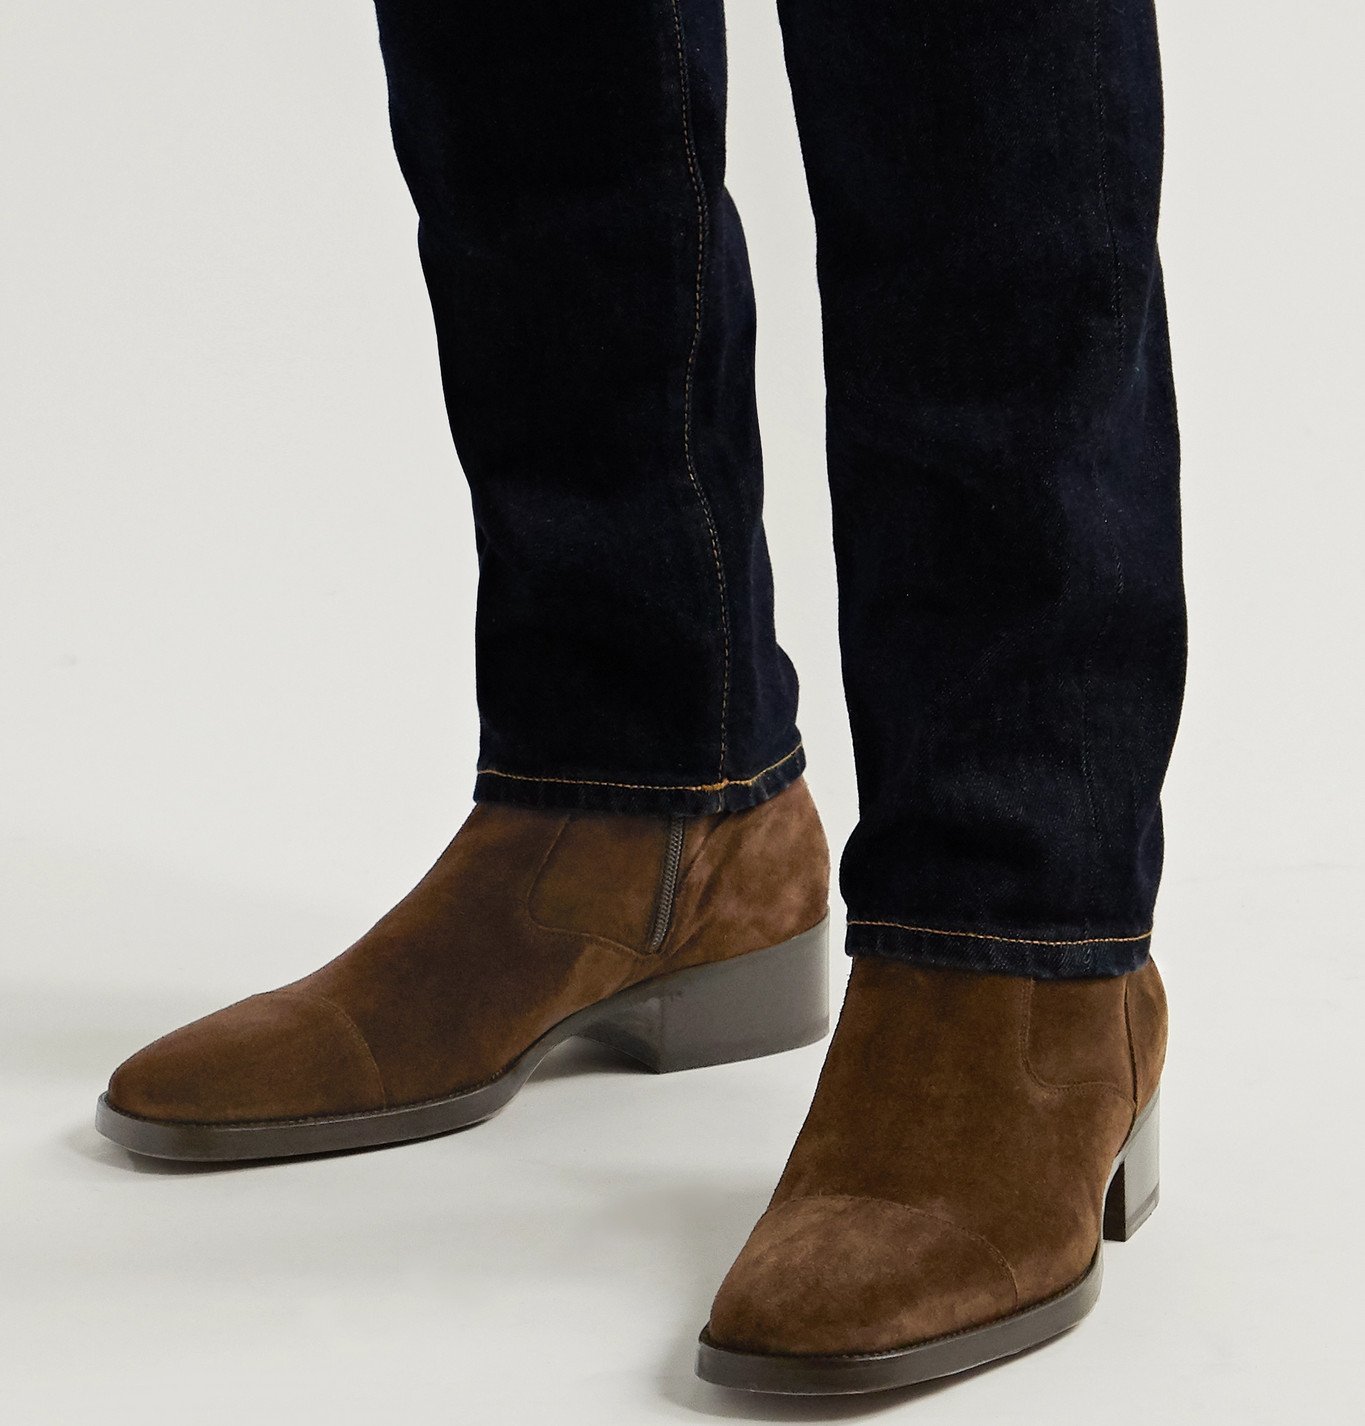 TOM FORD - Rochester Suede Boots - Brown TOM FORD